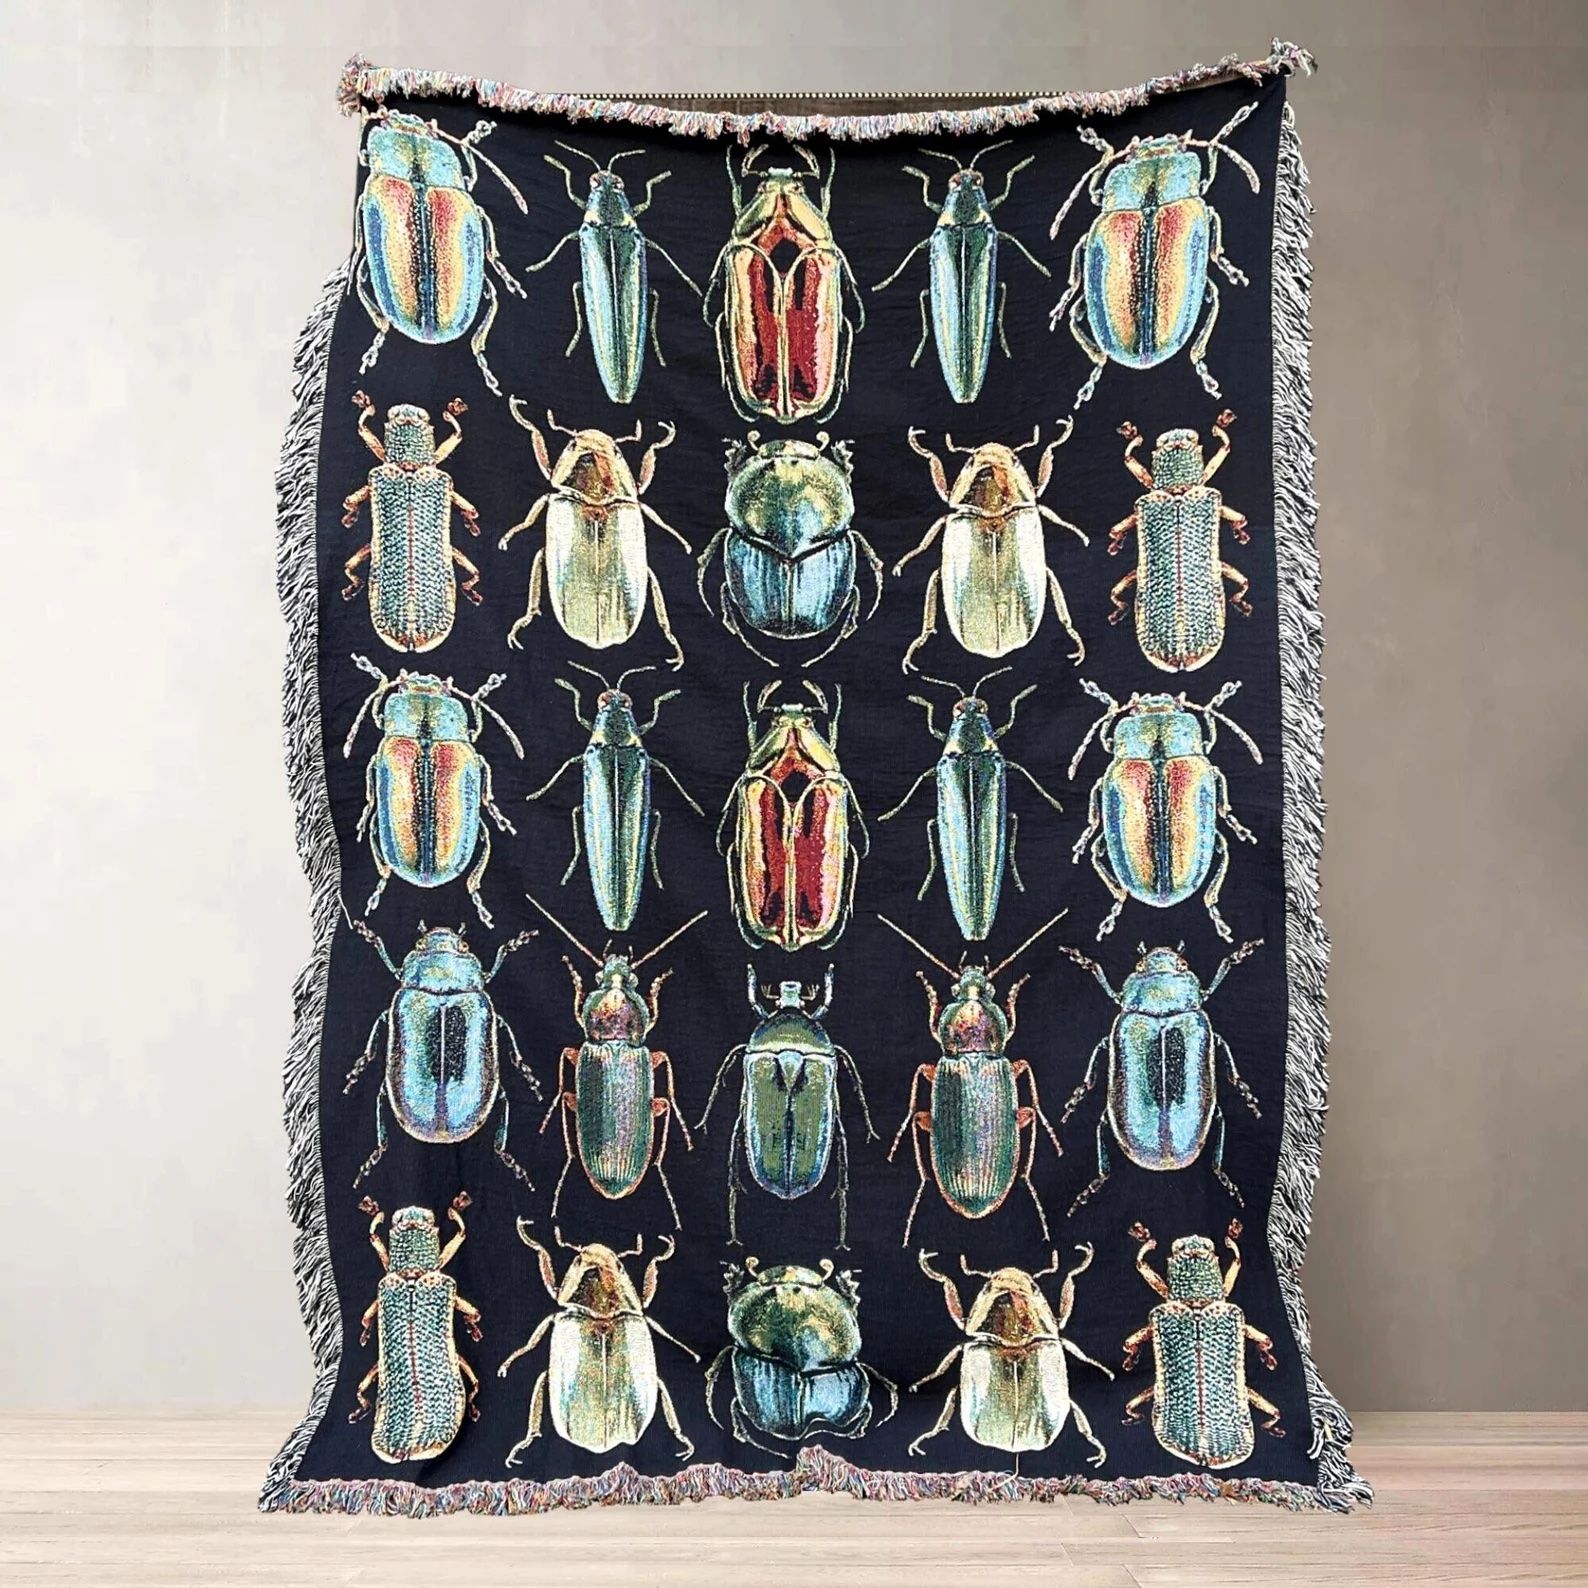 woven blanket with images of beetles printed on it